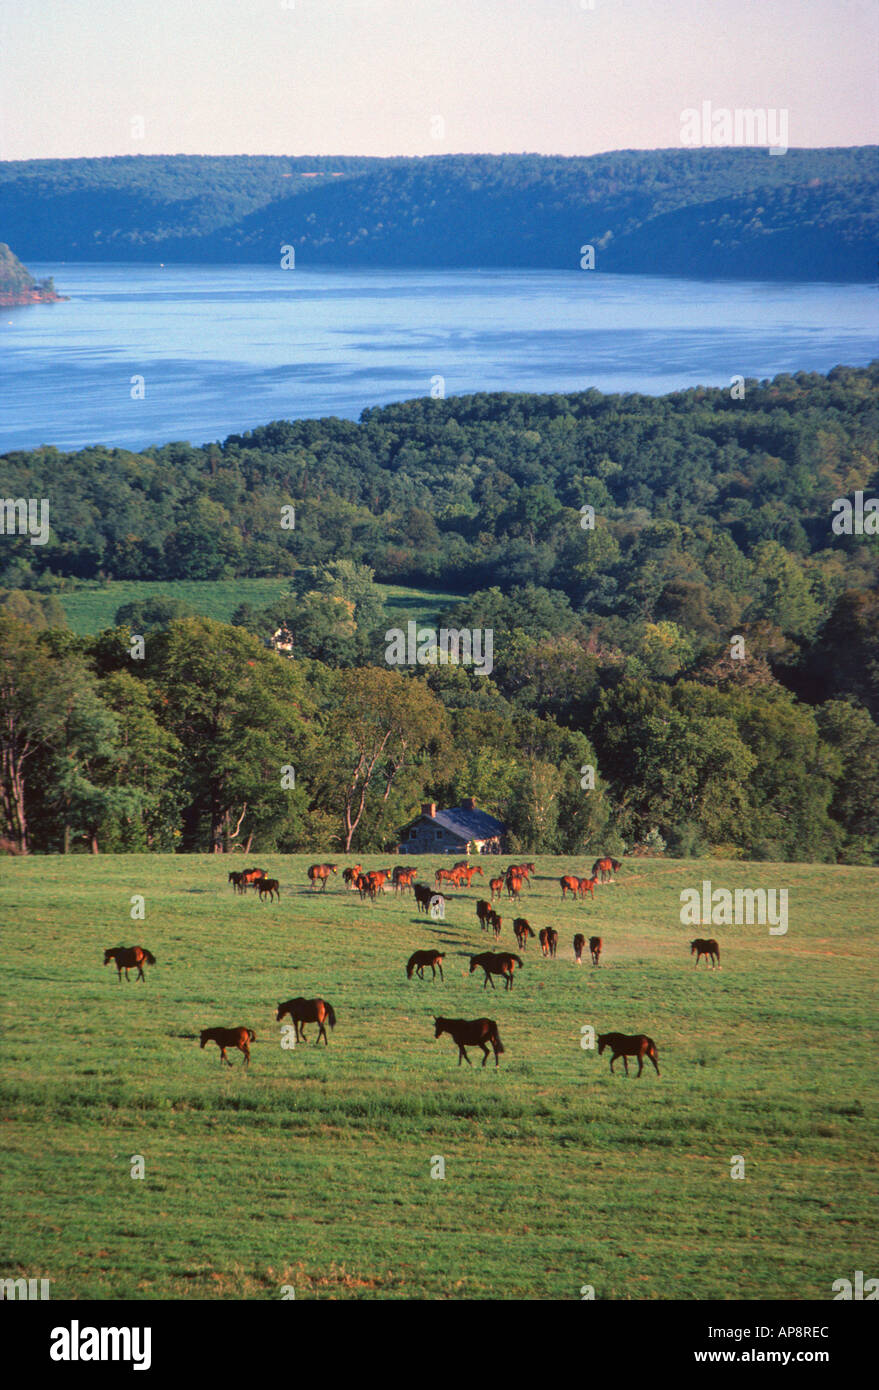 Horses returning to their stables at Lauxmont Farms along the Susquehanna River near Wrightsville Pennsylvania USA Stock Photo